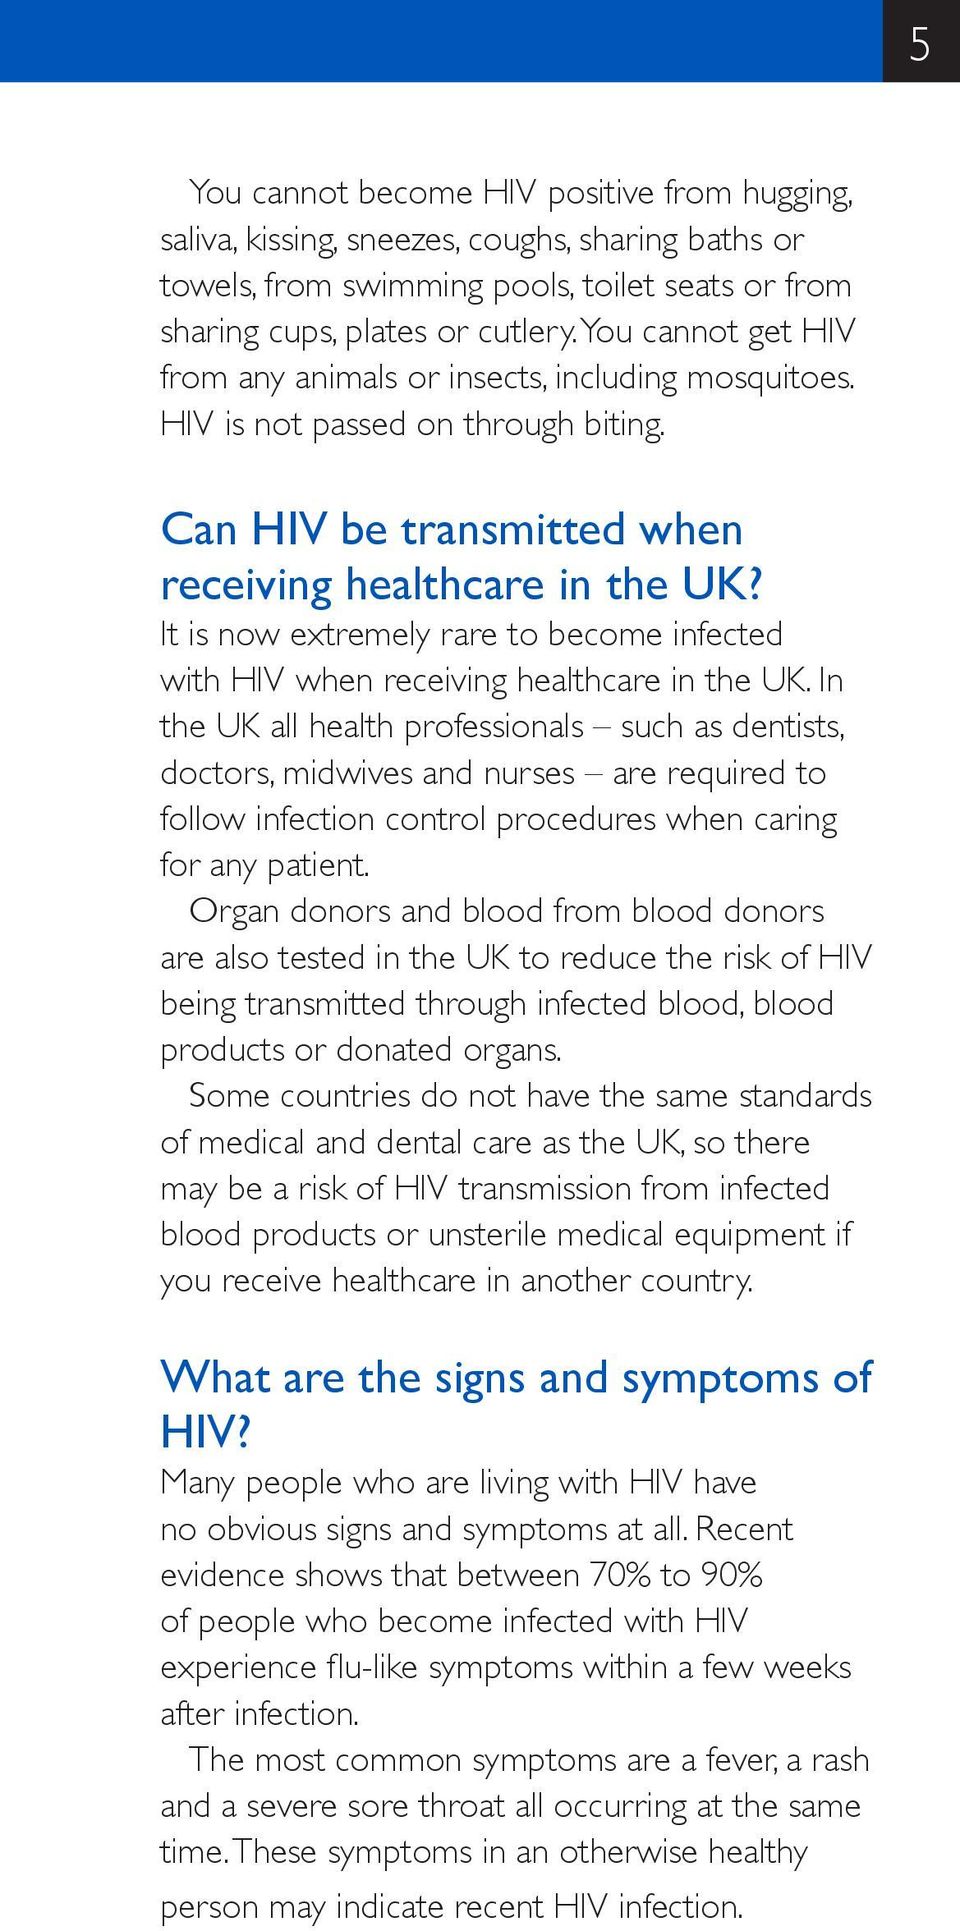 It is now extremely rare to become infected with HIV when receiving healthcare in the UK.